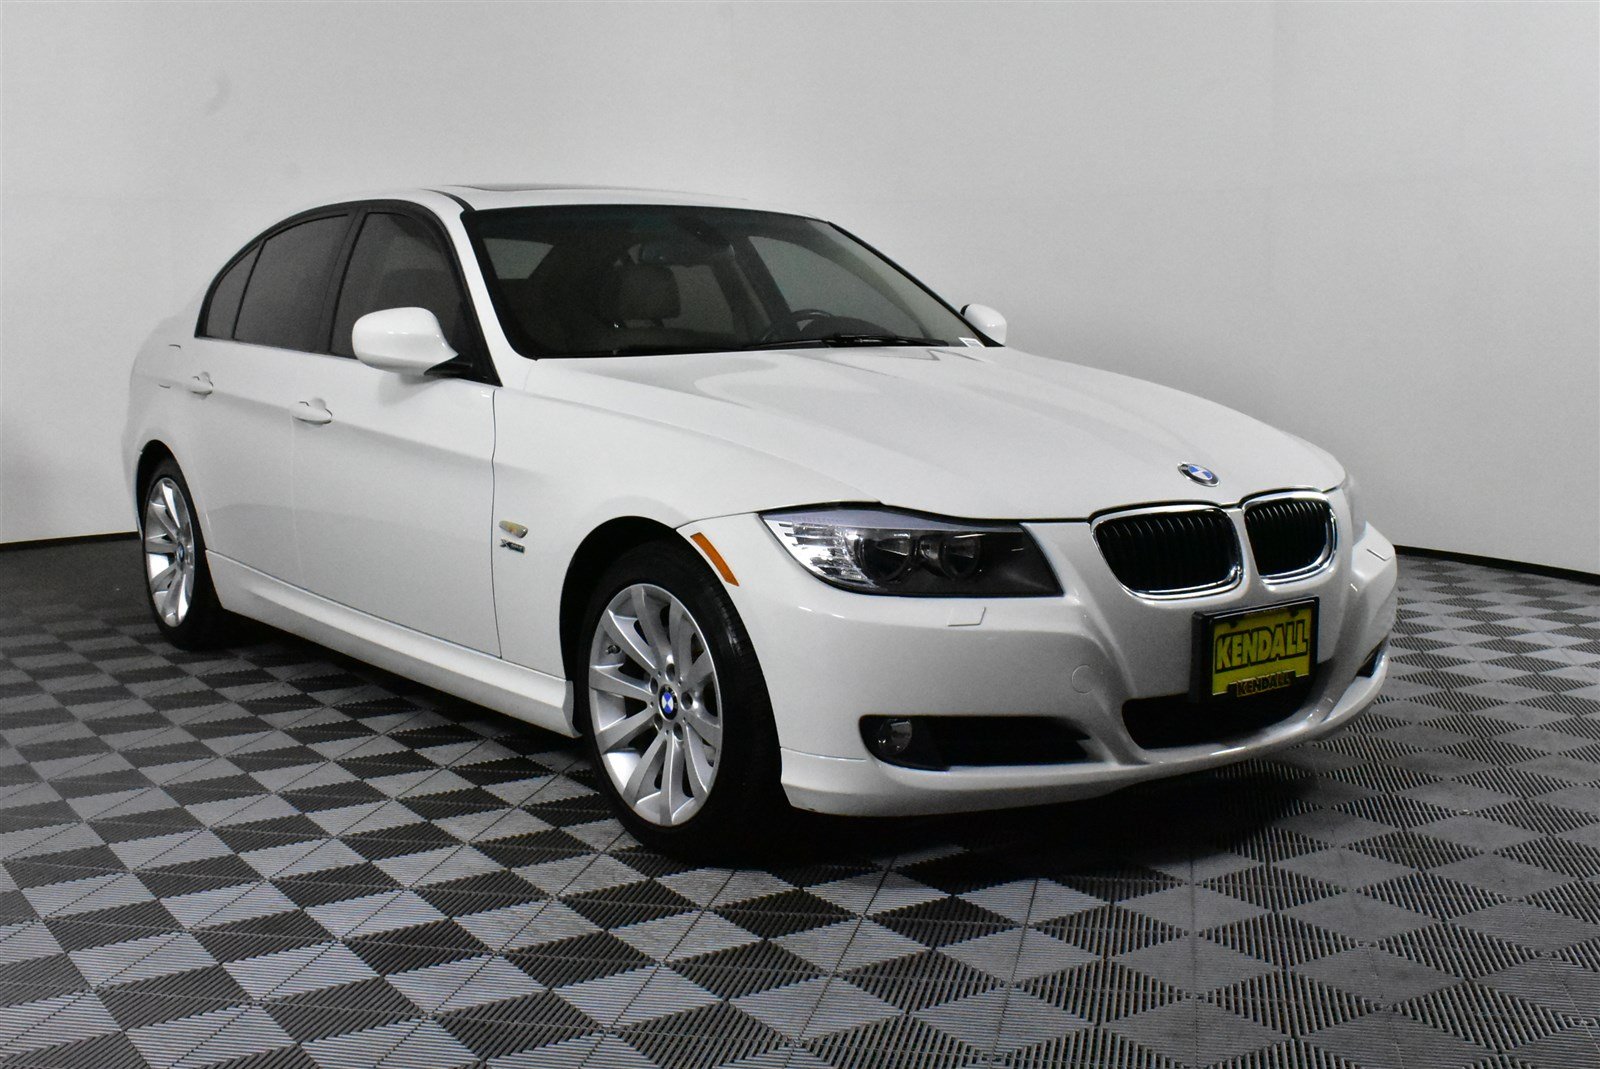 PreOwned 2011 BMW 3 Series 328i xDrive in Nampa D68039B